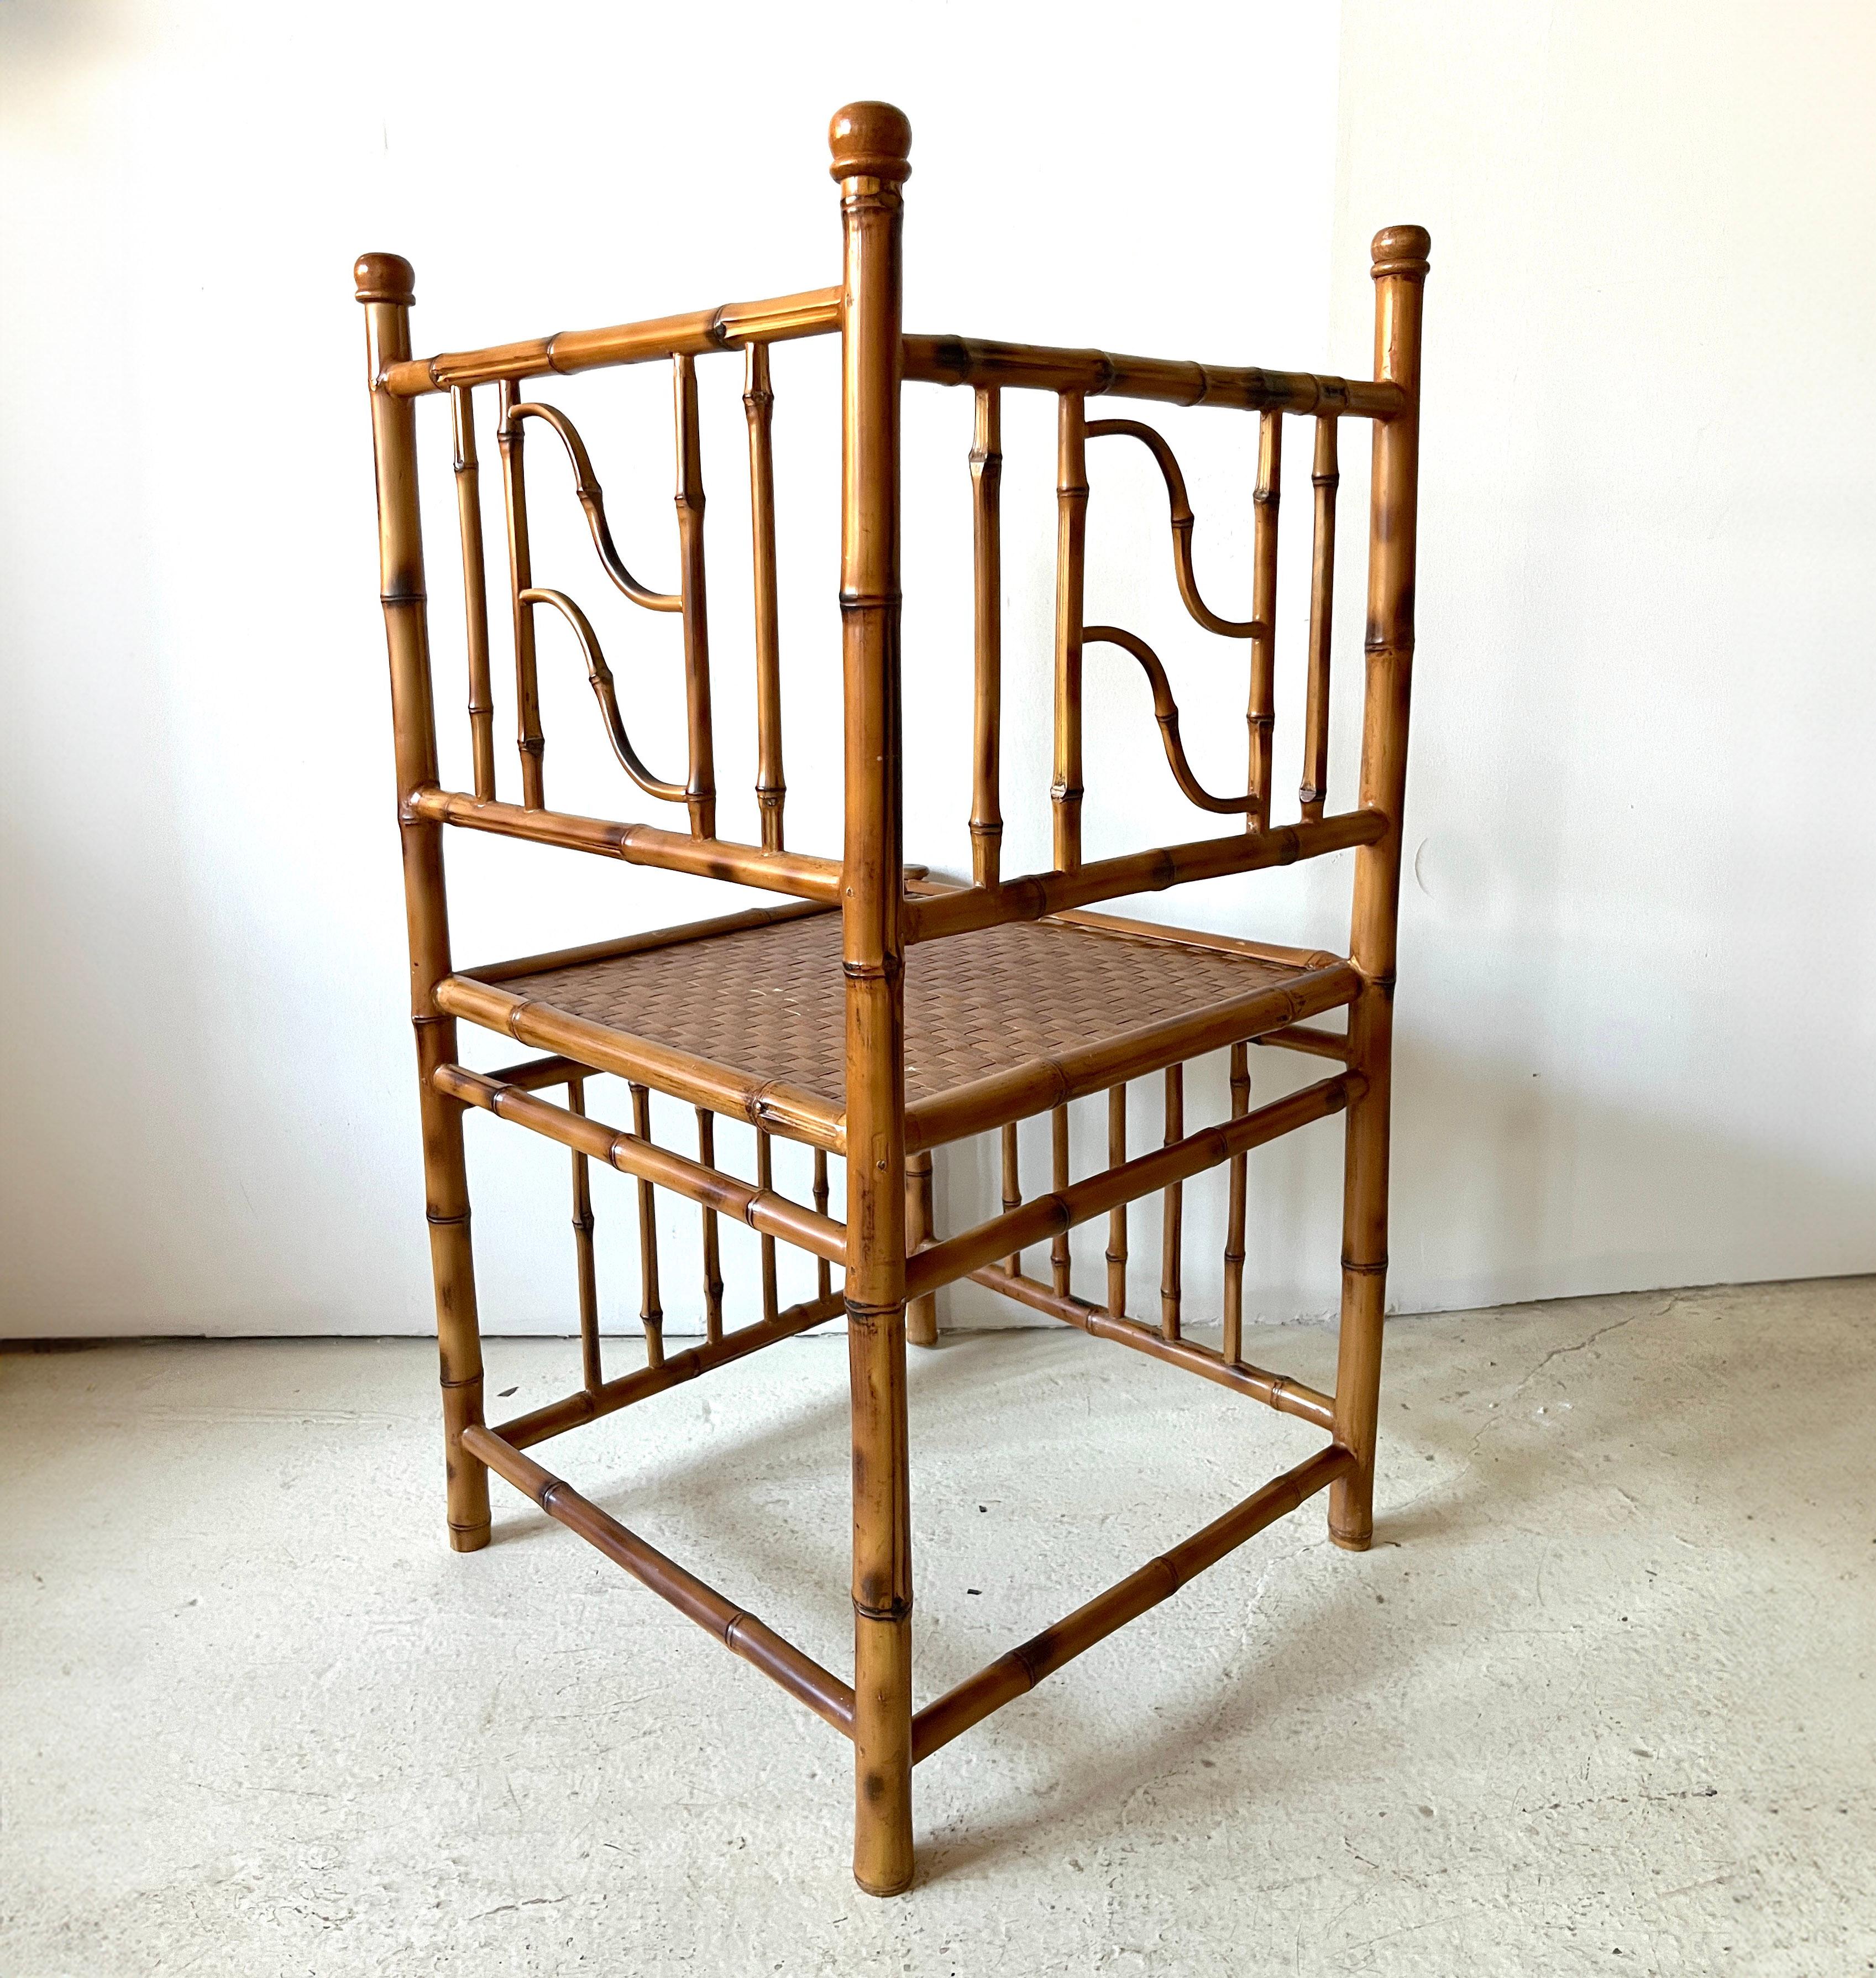 Classic Vintage Bamboo Corner Chair, British Colonial Decor, Bohemian Seating For Sale 4